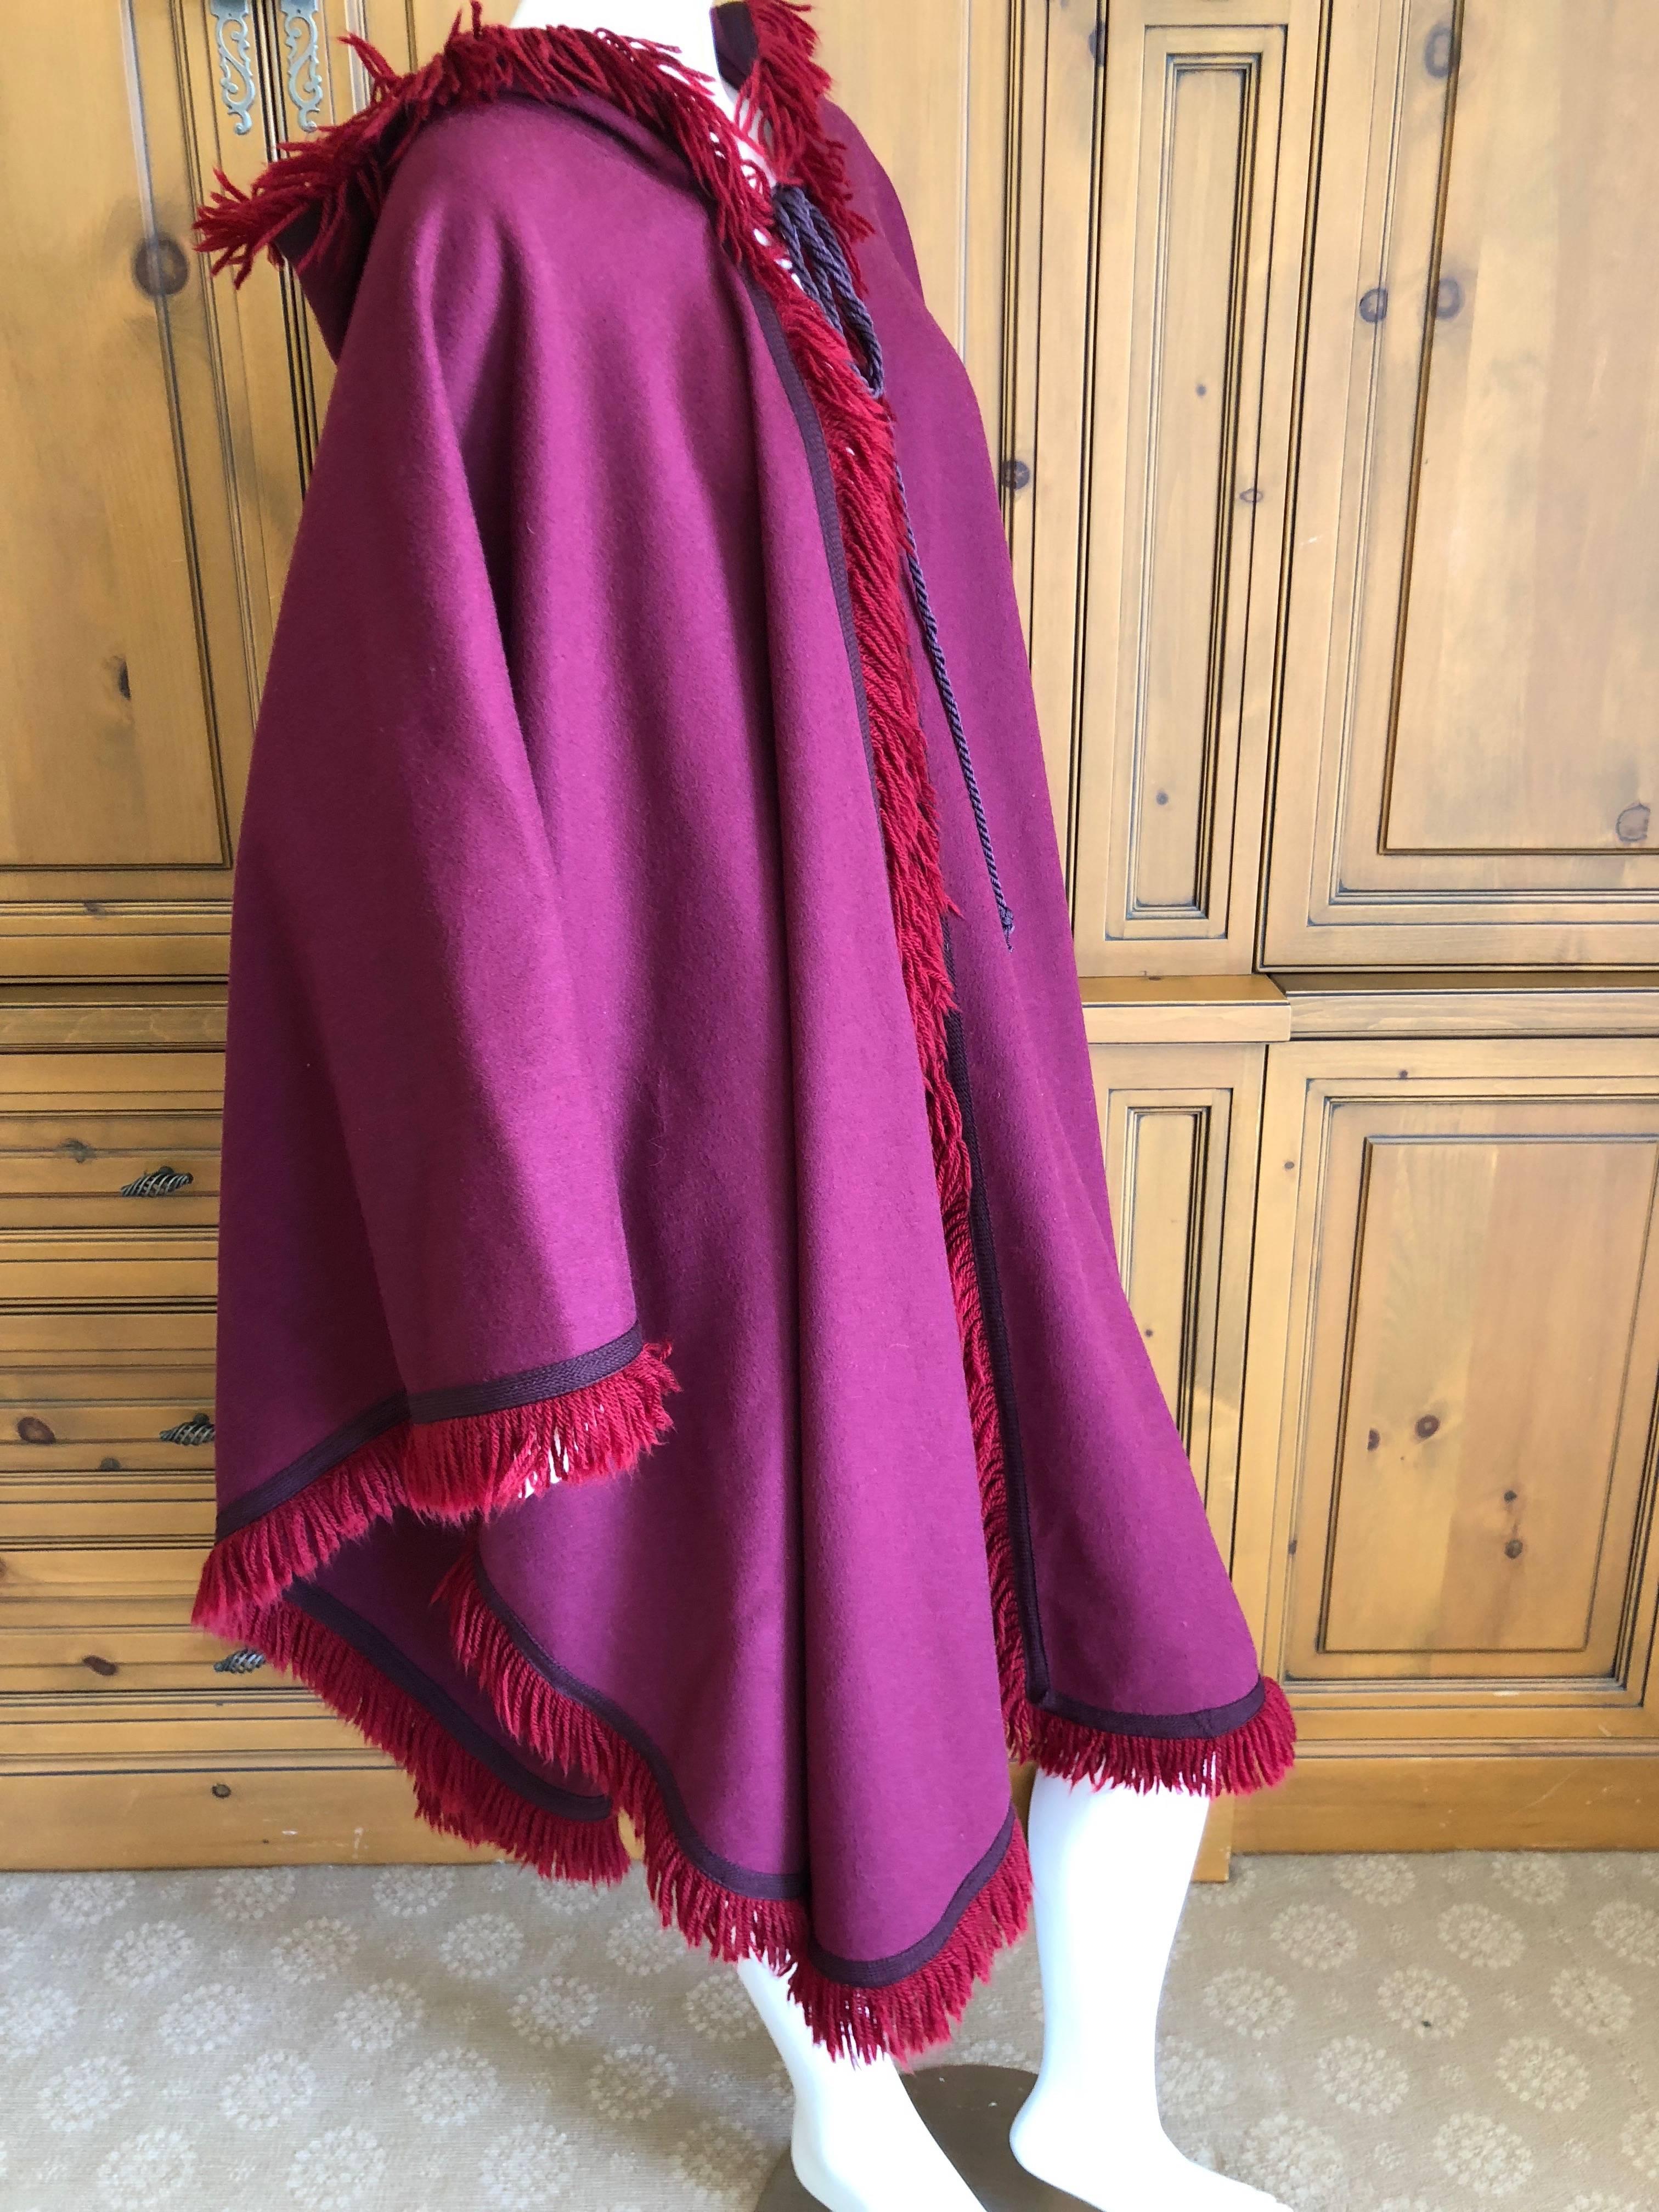 Yves Saint Laurent Rive Gauche Fringed Fuchsia Cape with Hood and Tassel For Sale 5